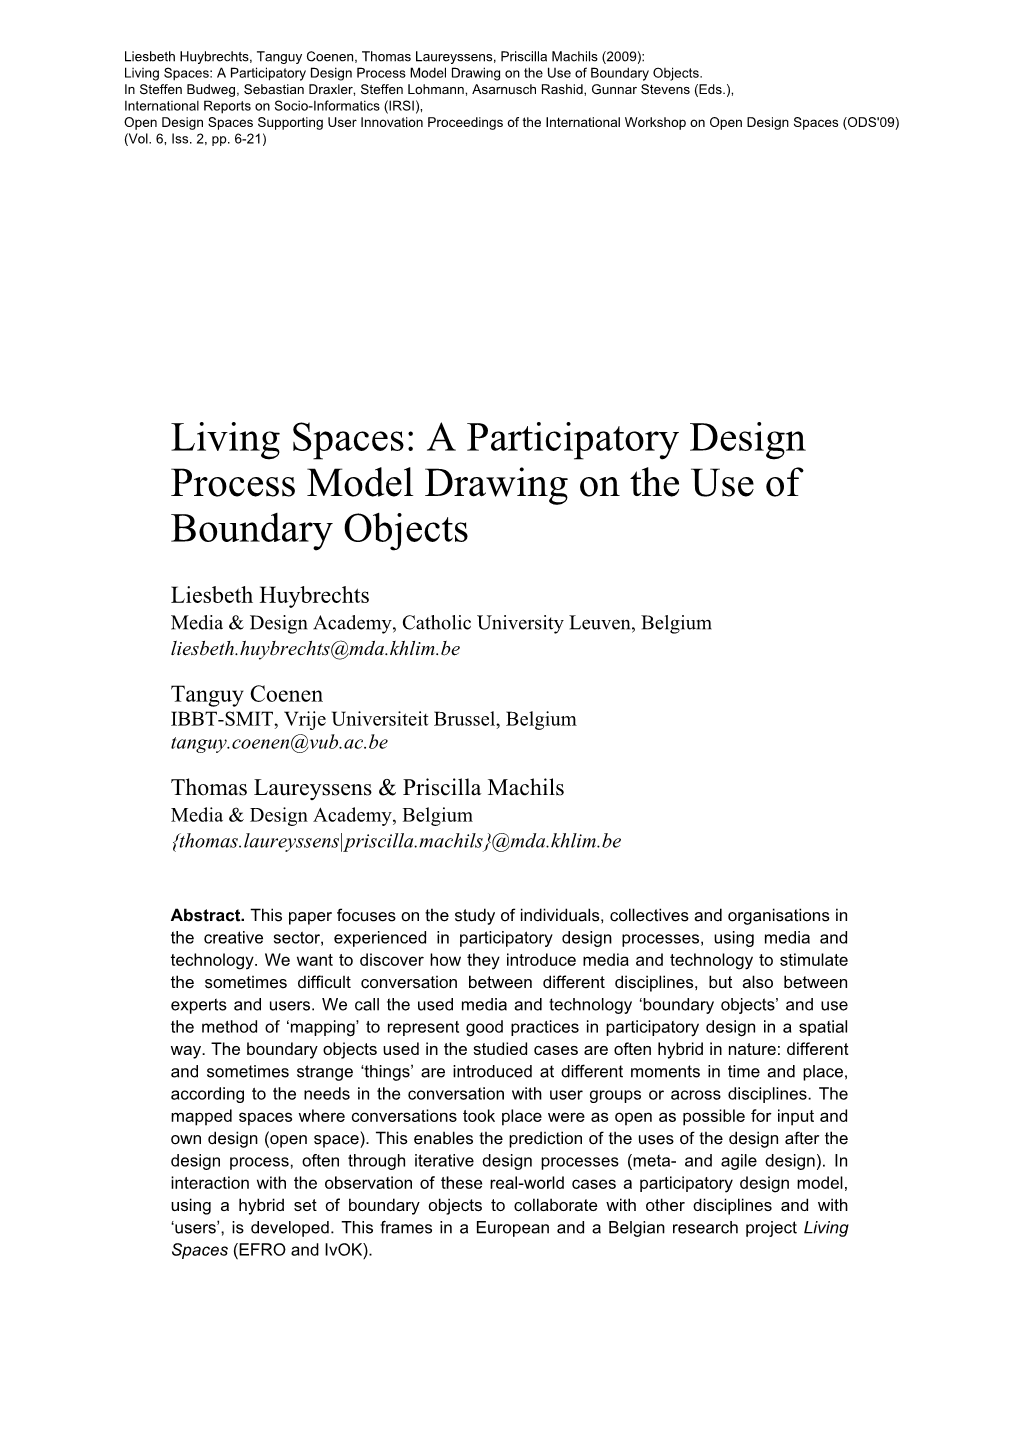 Living Spaces: a Participatory Design Process Model Drawing on the Use of Boundary Objects